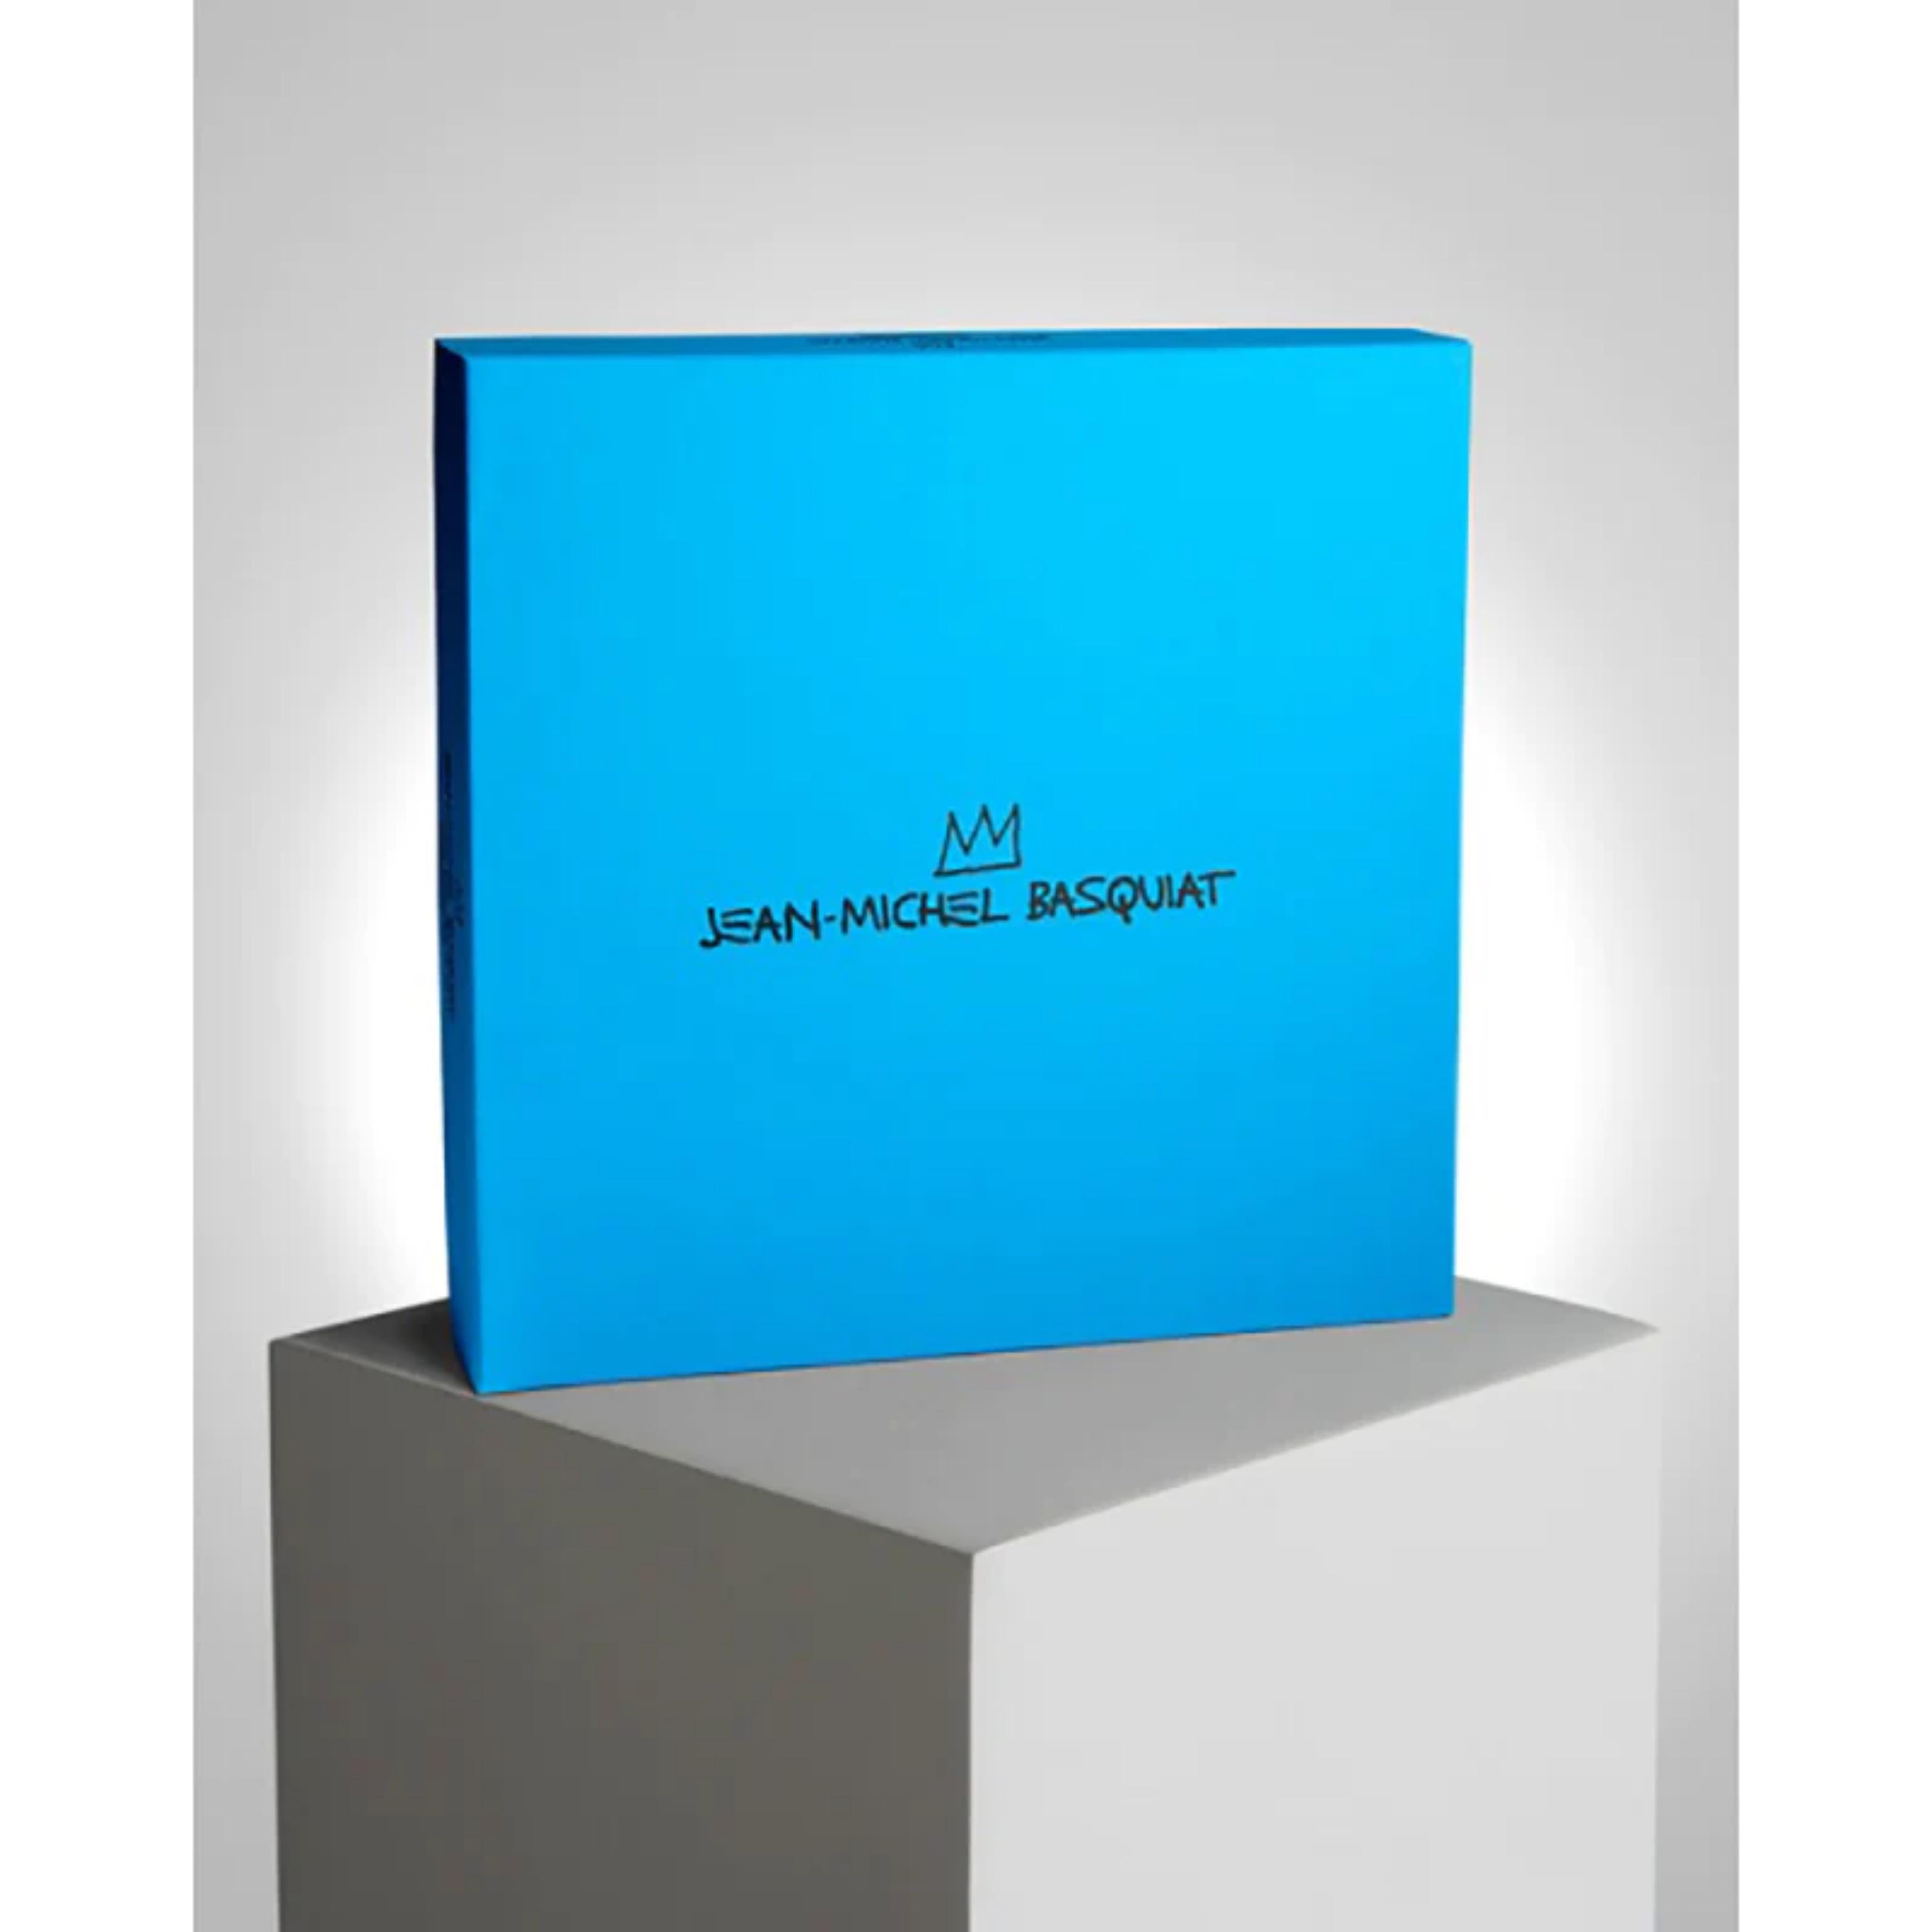 Jean-Michel Basquiat
Estate Authorized Porcelain Plate in Box, 2014
Porcelain Plate in Blue Presentation Box with Estate Logo
This plate is in excellent condition and comes in an elegant blue gift box bearing the estate copyright symbol, not